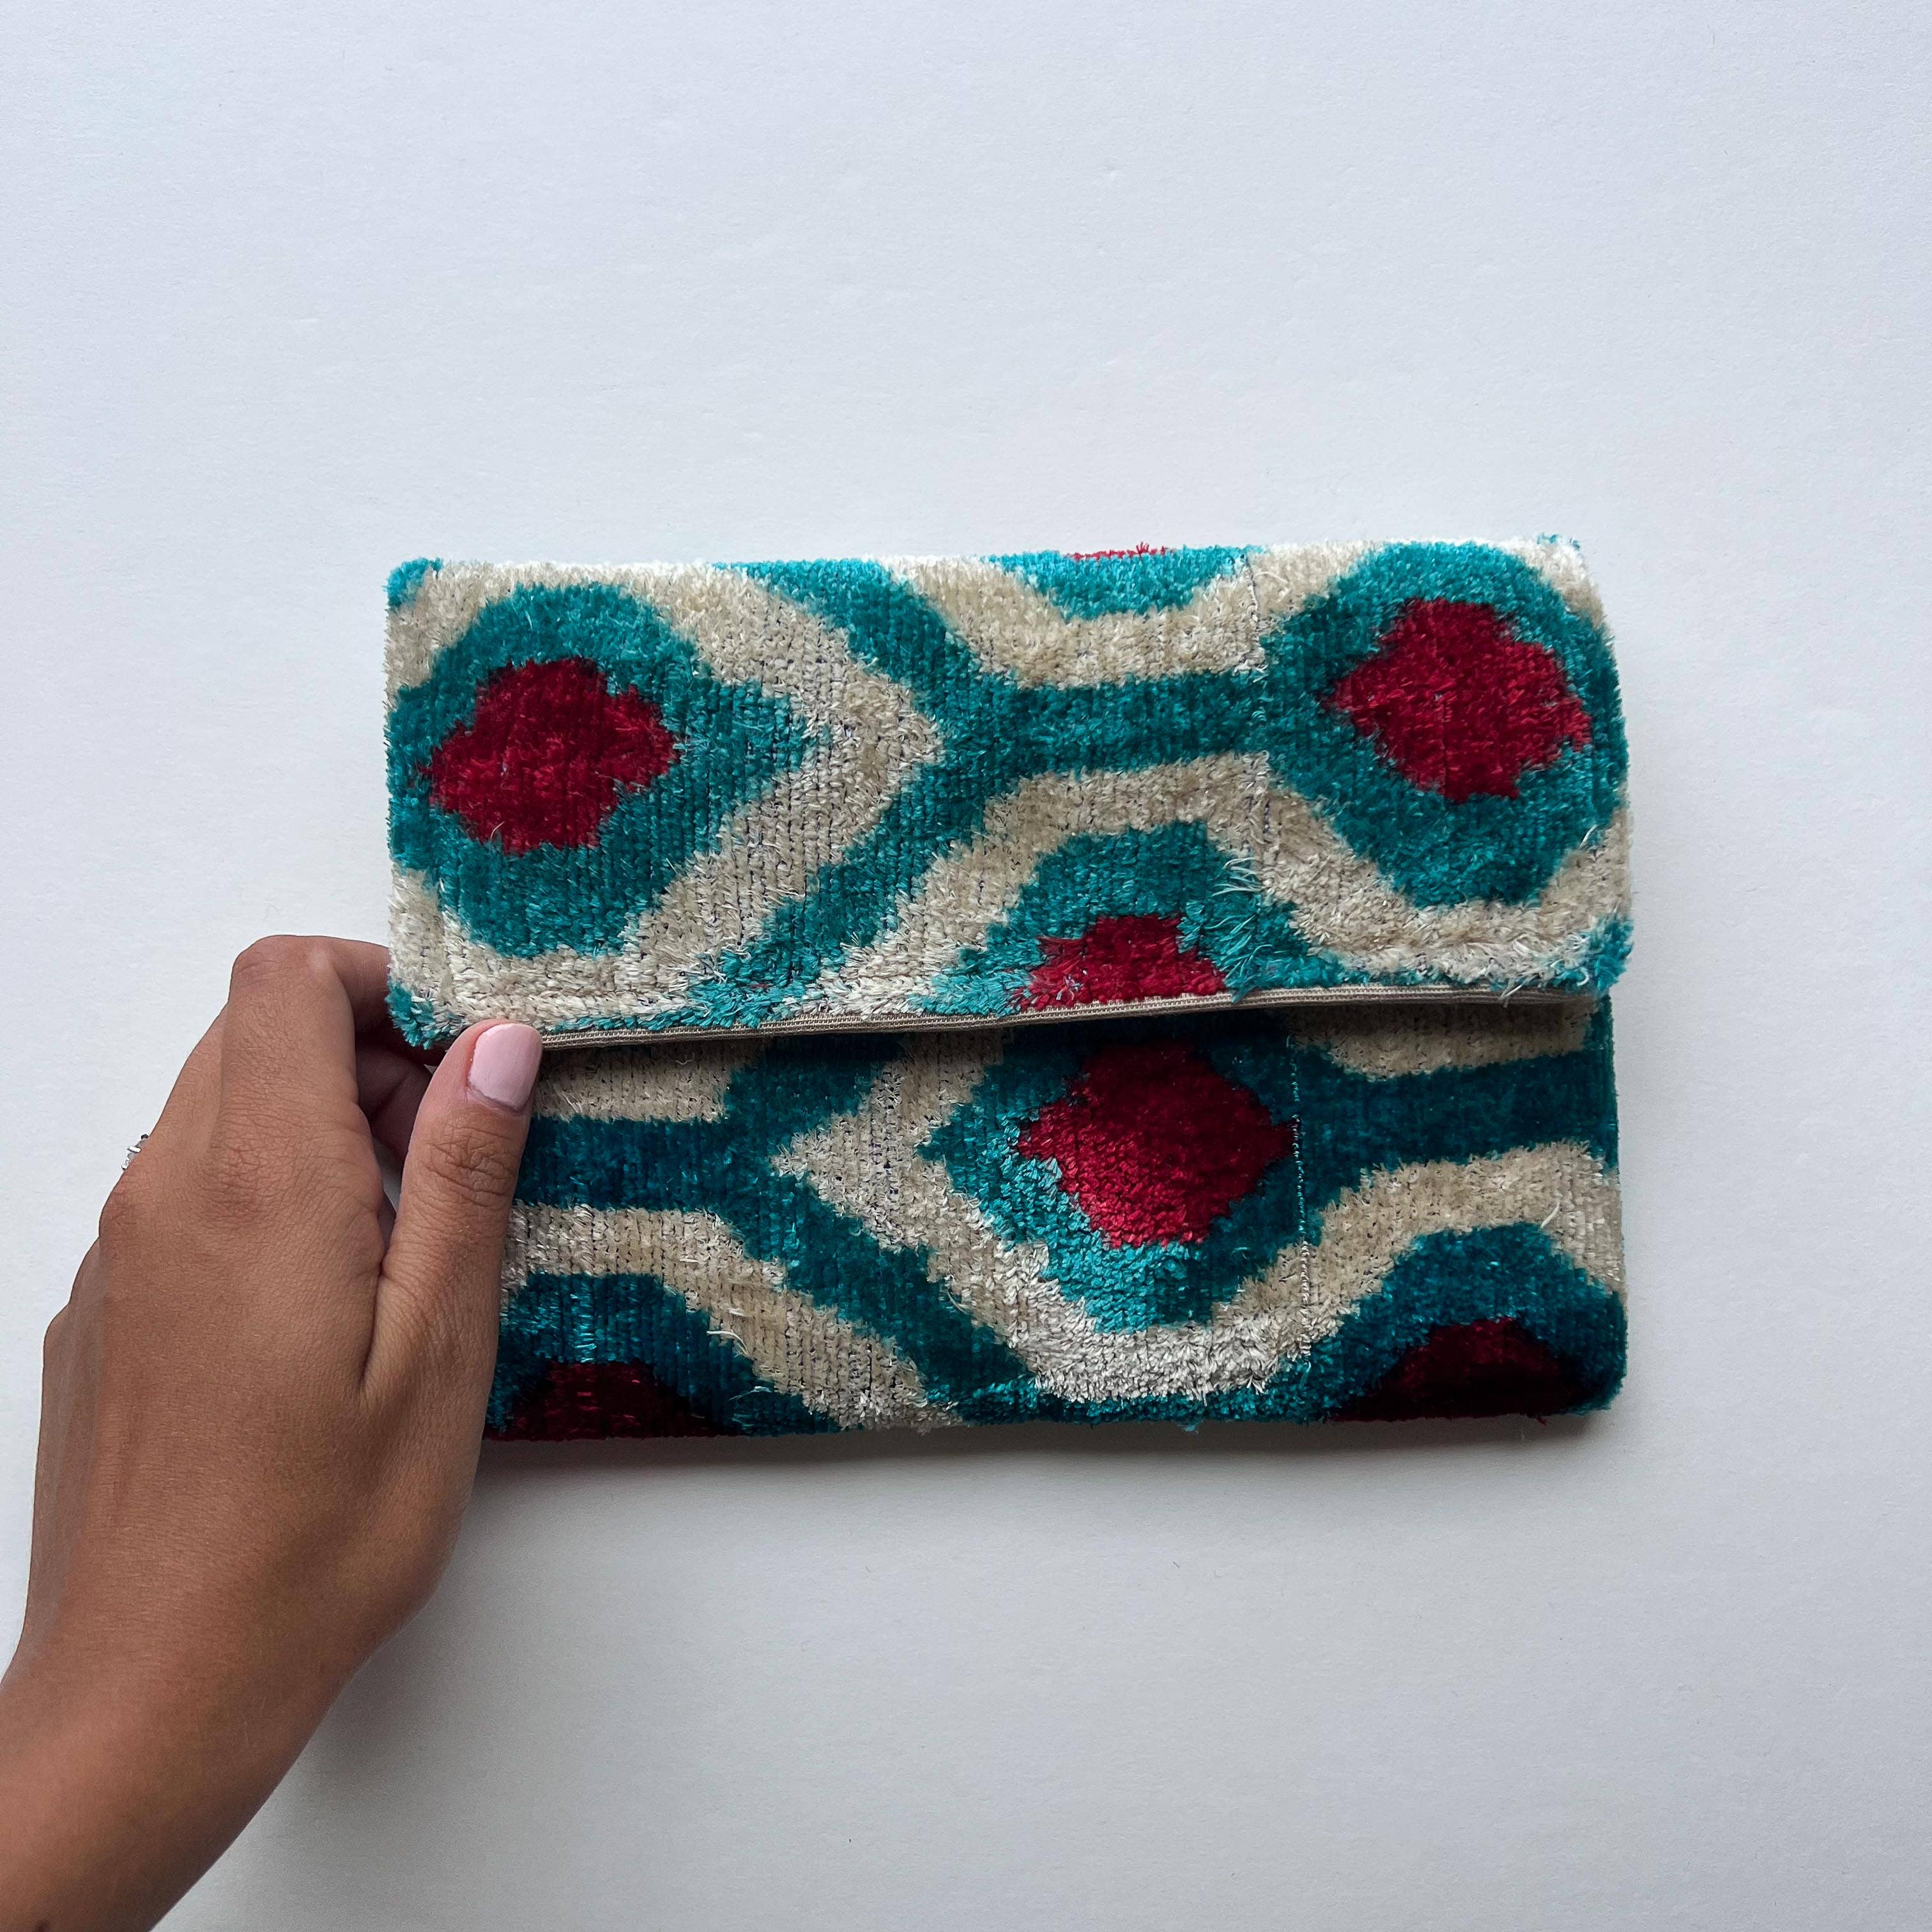 Master Piece Crafts Turquoise Handmade Beaded Clutch, Evening Clutch Bag, Formal Event Clutch Purse, Clutches and Evening Bags, Gift for her